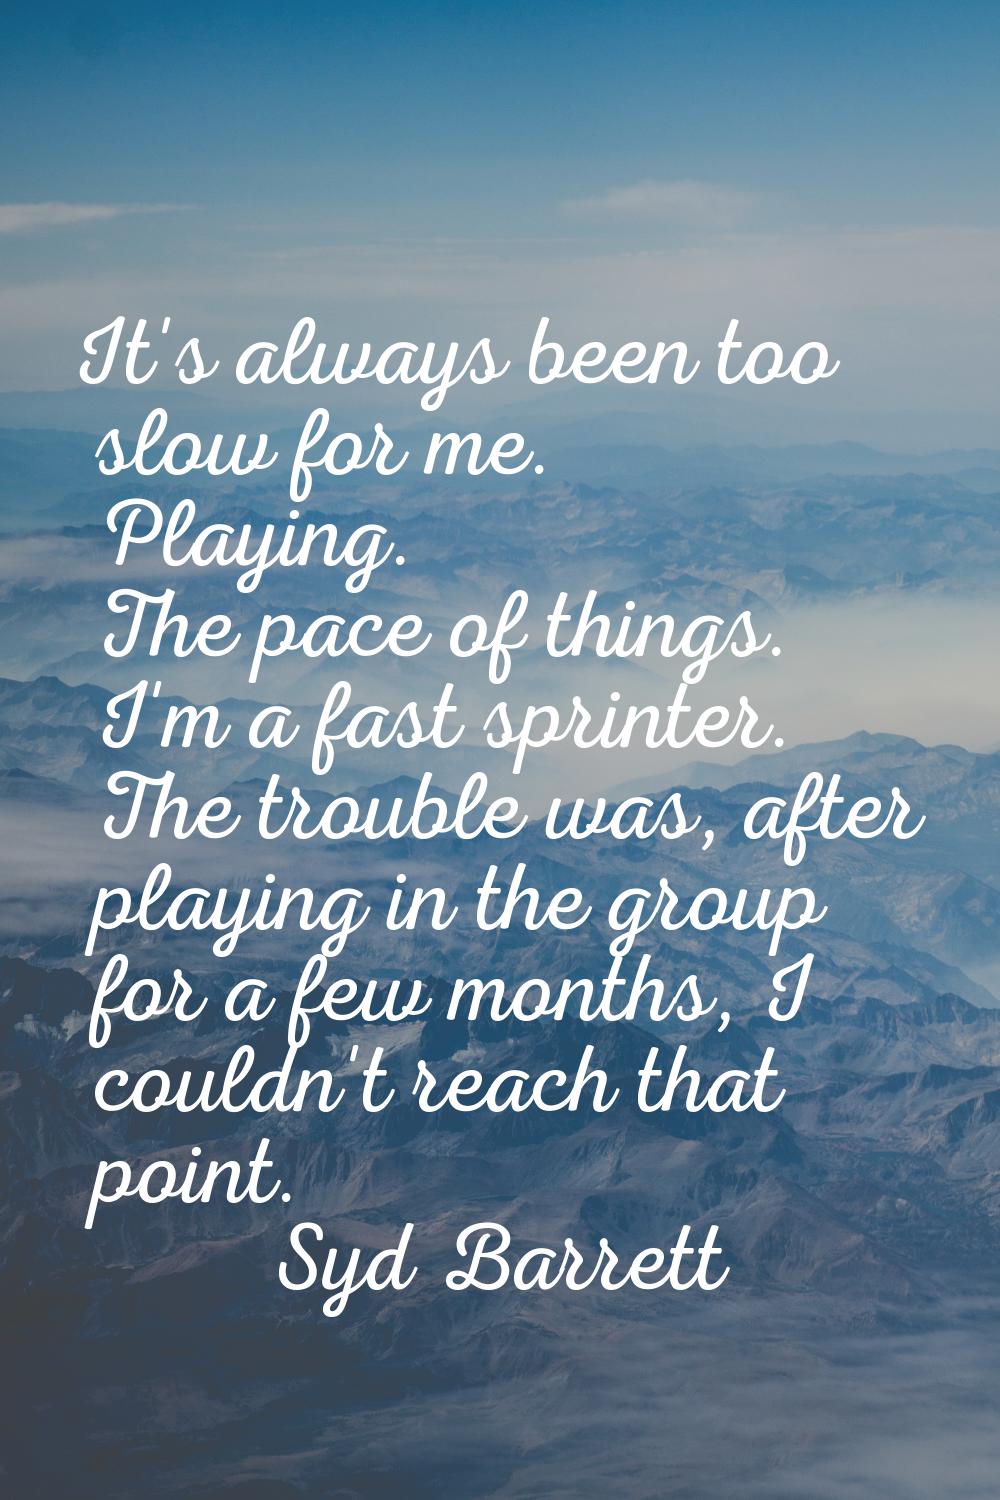 It's always been too slow for me. Playing. The pace of things. I'm a fast sprinter. The trouble was